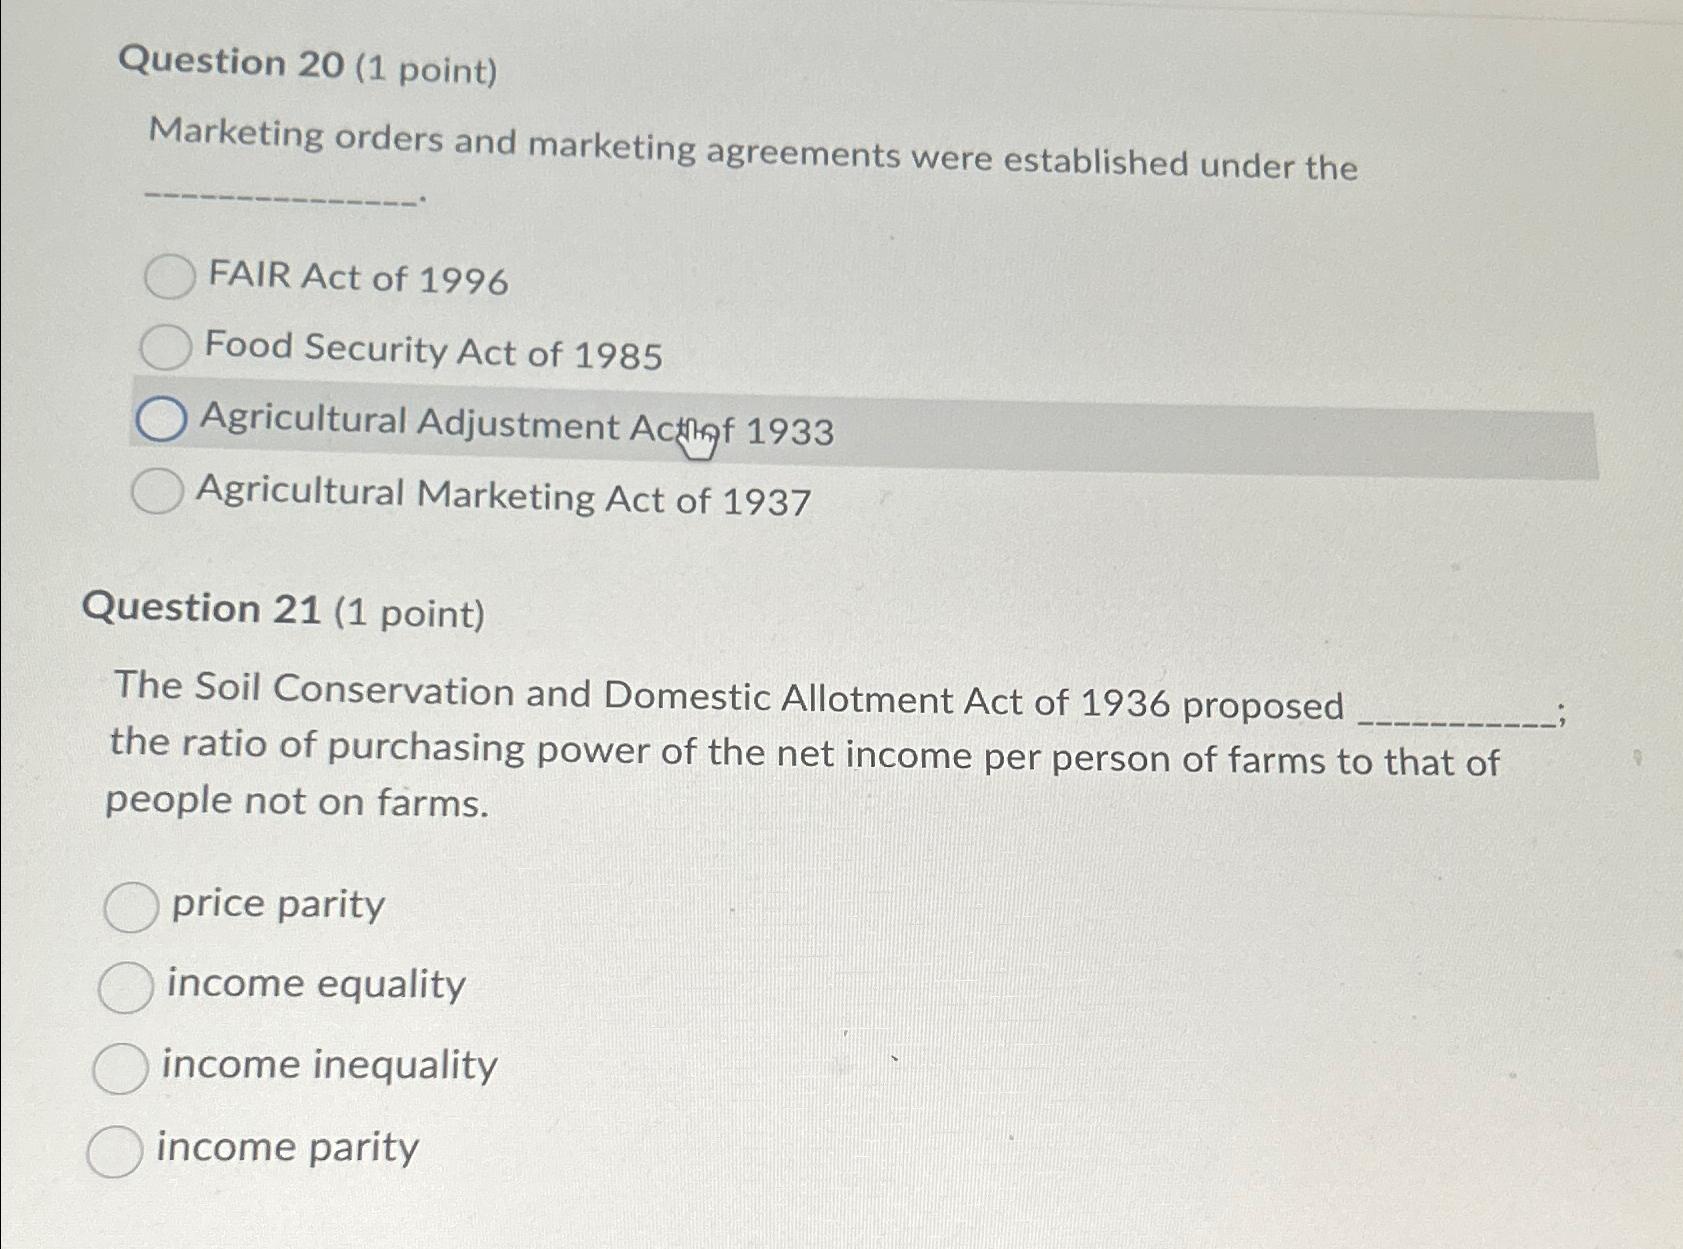 Question 20 (1 point) Marketing orders and marketing agreements were established under the FAIR Act of 1996